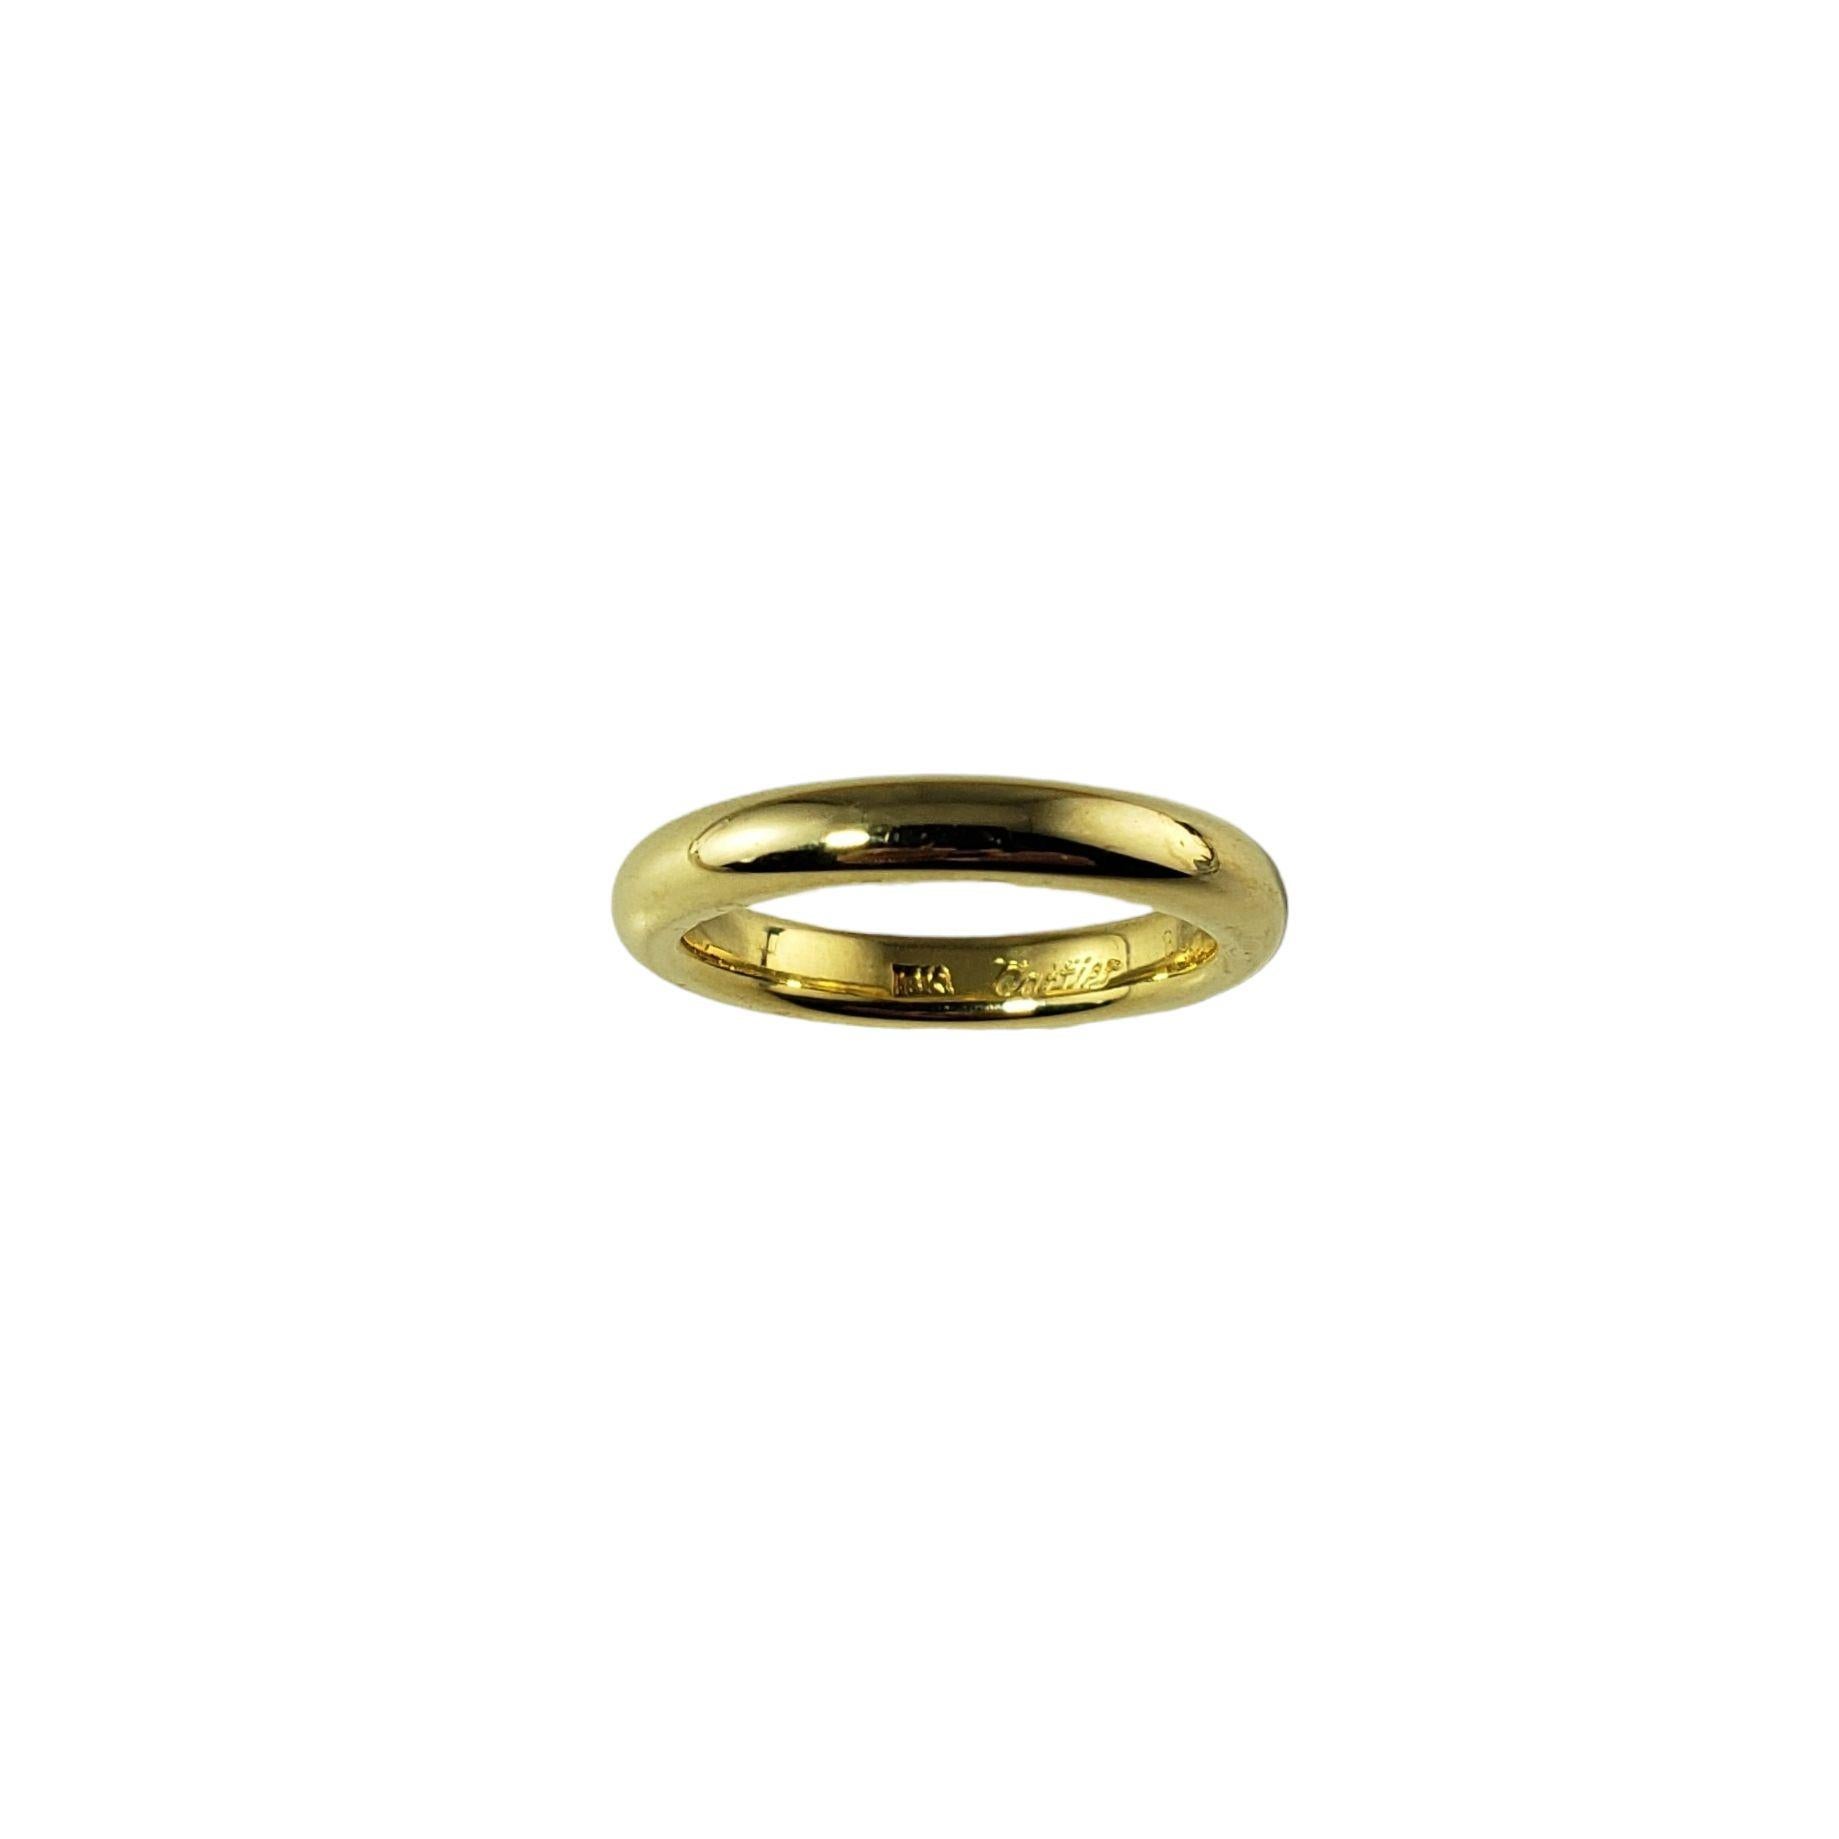 Vintage Cartier 18 Karat Yellow Gold Wedding Band Size 4.5-

This elegant wedding band by Cartier is crafted in meticulously detailed 18K yellow gold.  Width: 3 mm.

Ring Size:  4.5 
        
Weight:  4.9 gr./  3.1 dwt.

Hallmark: 18K Cartier